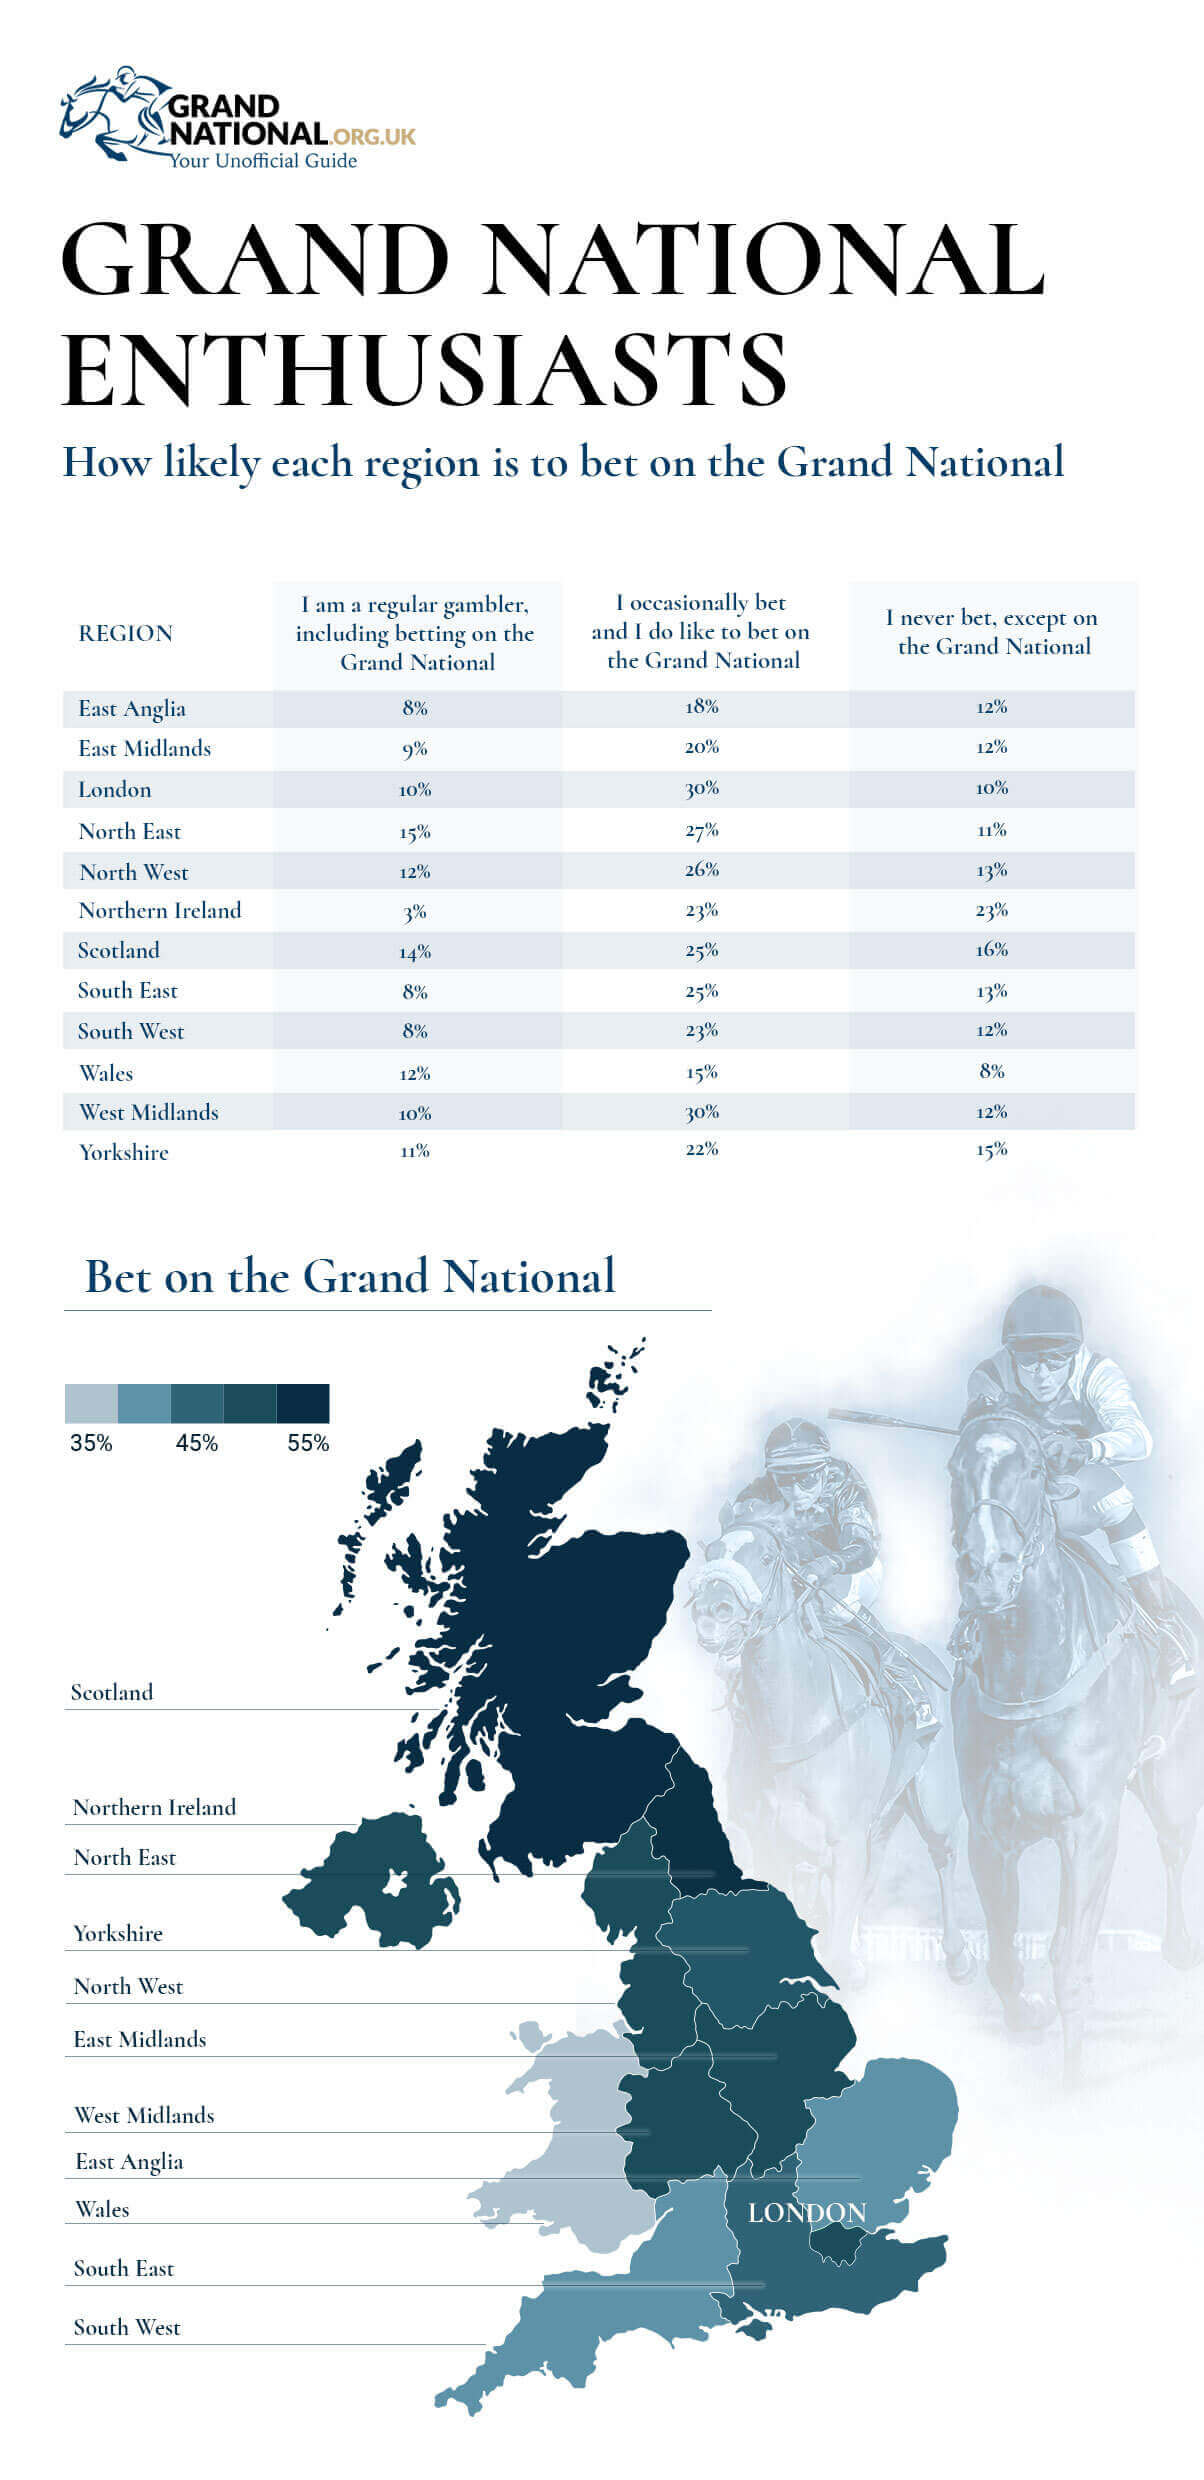 Where Brits are most likely to bet on the Grand National